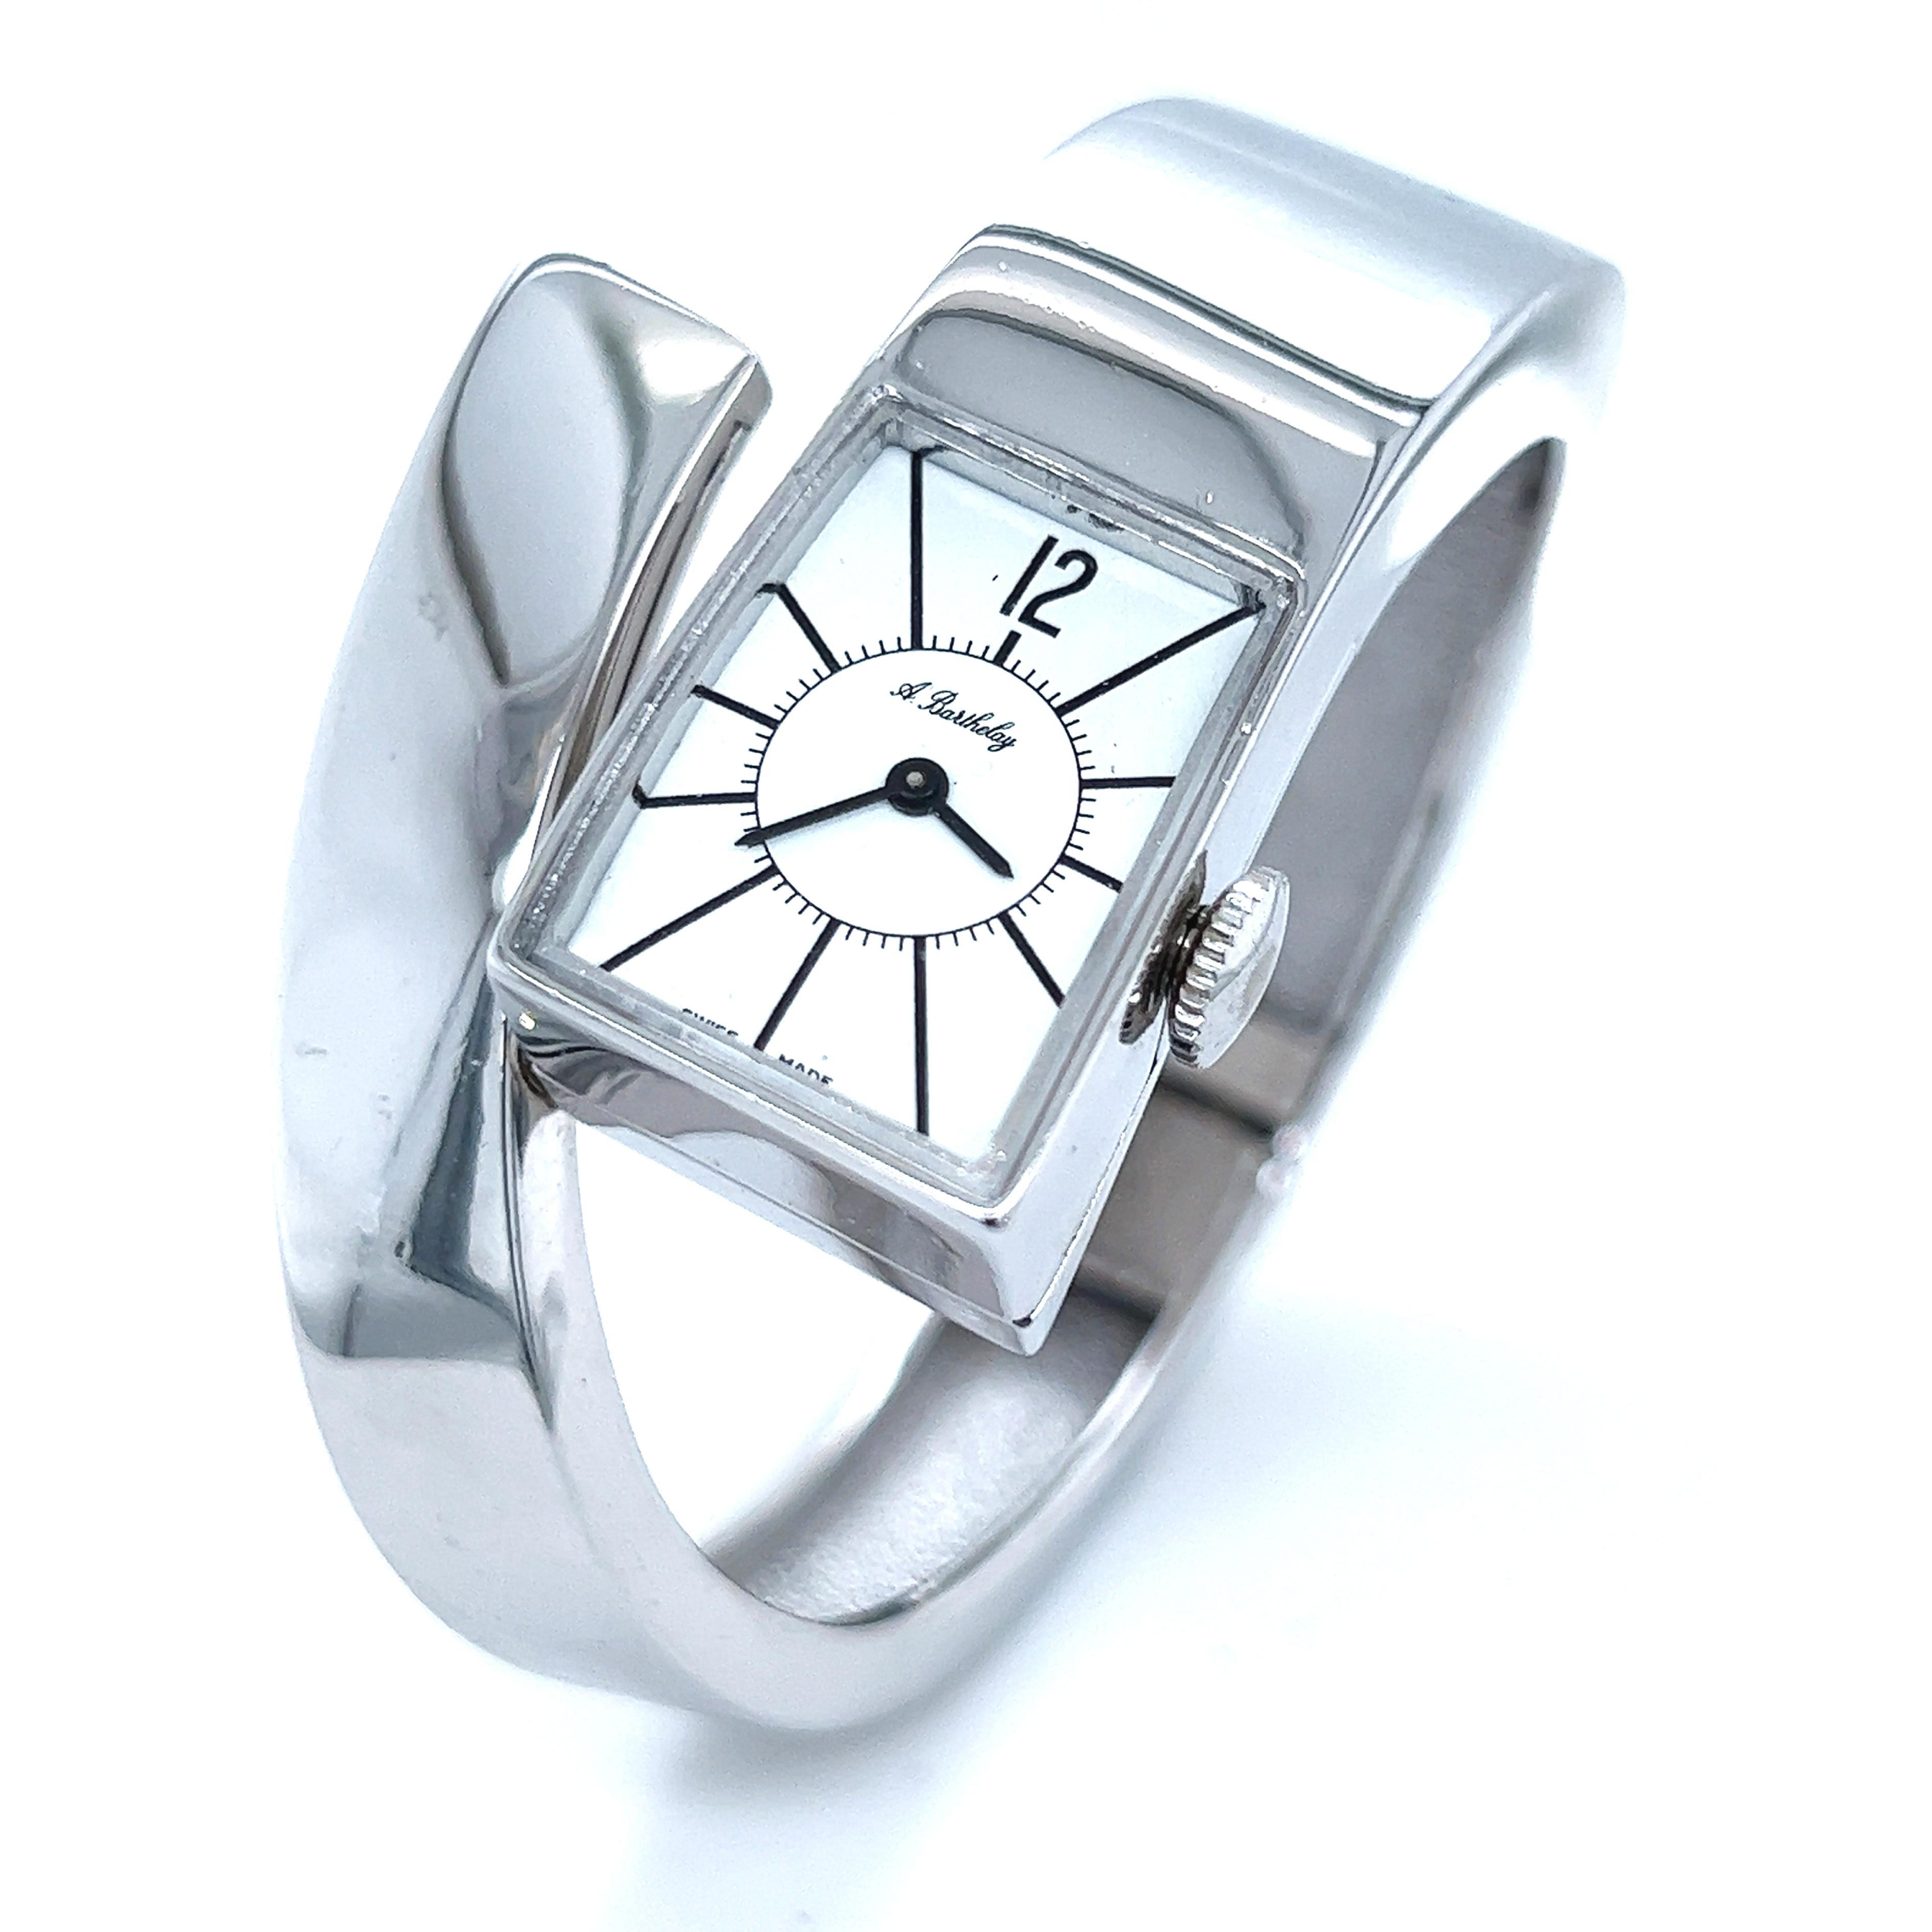 Original 1971, Exquisite Alexis Barthelay Snake Bangle Solid Silver Watch, a special piece characterized by an elegant, unique, absolutely chic yet timeless design.
This iconic watch is fully functional, in excellent condition with no traces of